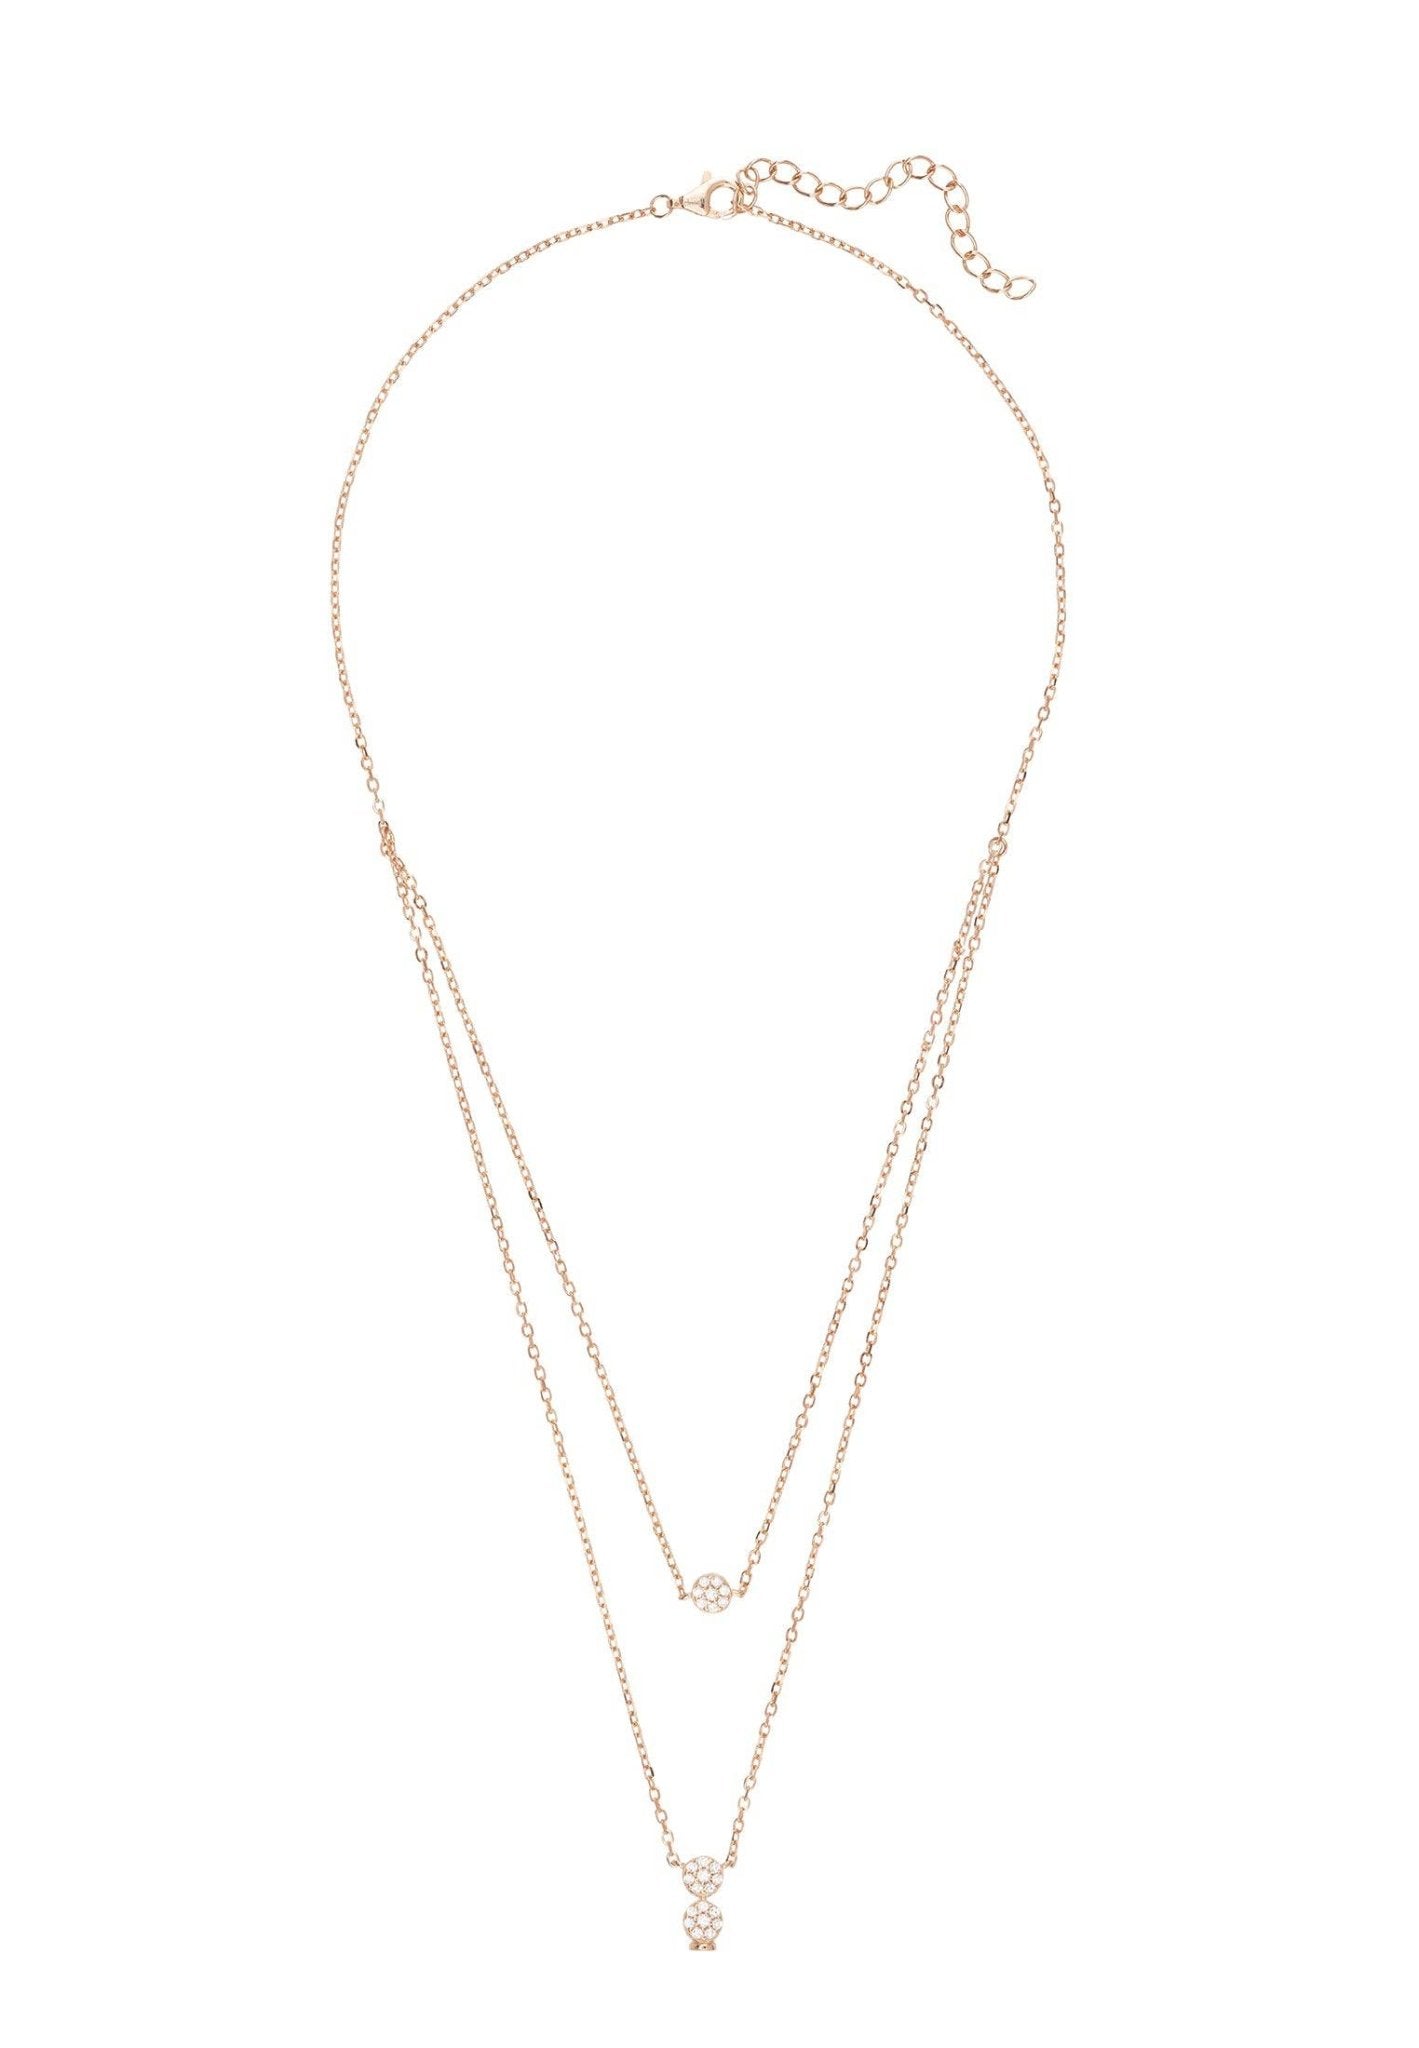 Pearl & Sparkles Layered Necklace Rosegold - LATELITA Necklaces